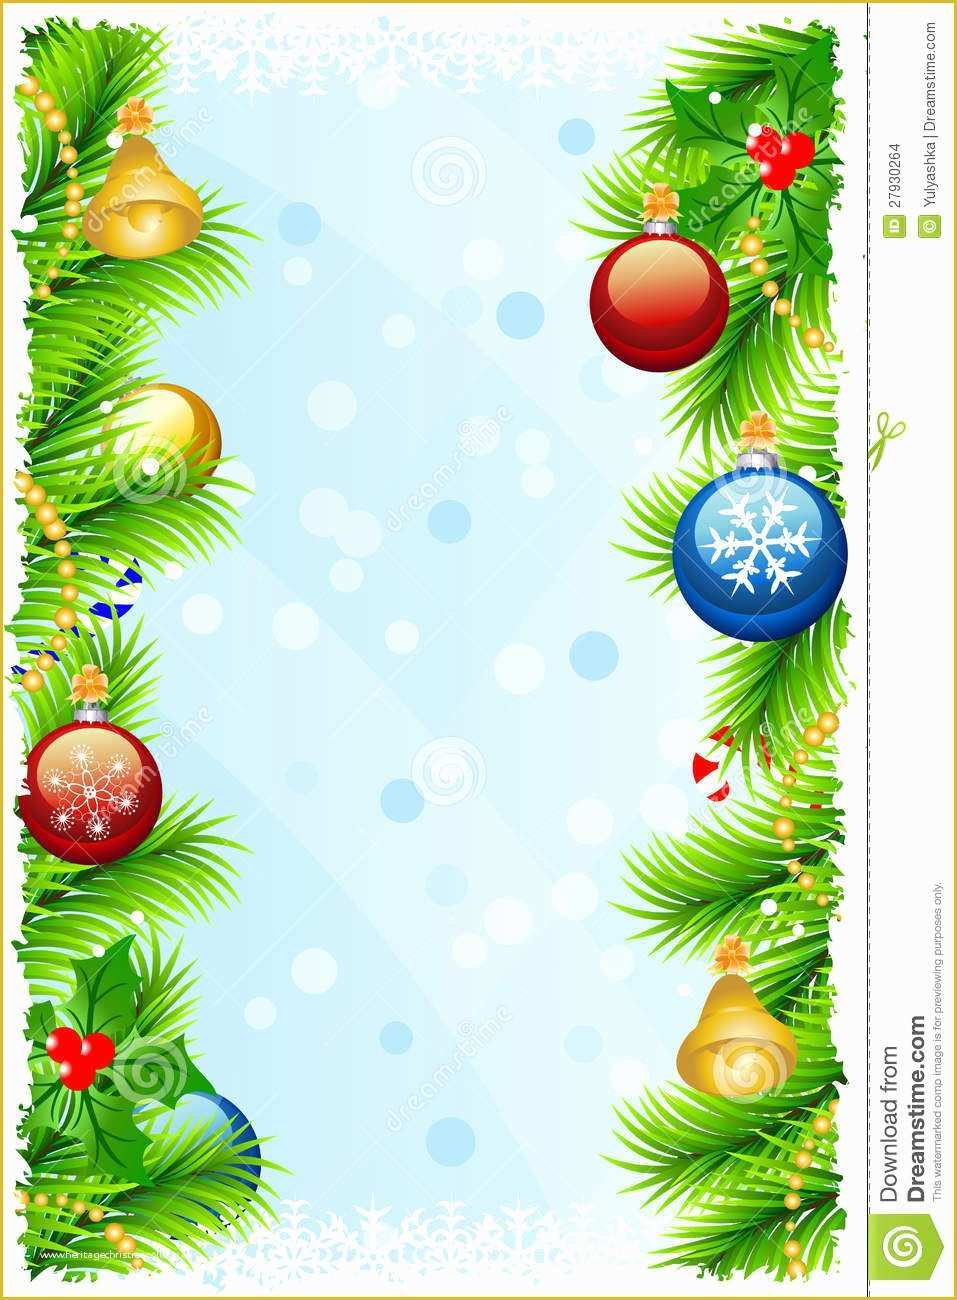 Free Christmas Greeting Card Templates Of Template Christmas Greeting Card Stock Vector Image